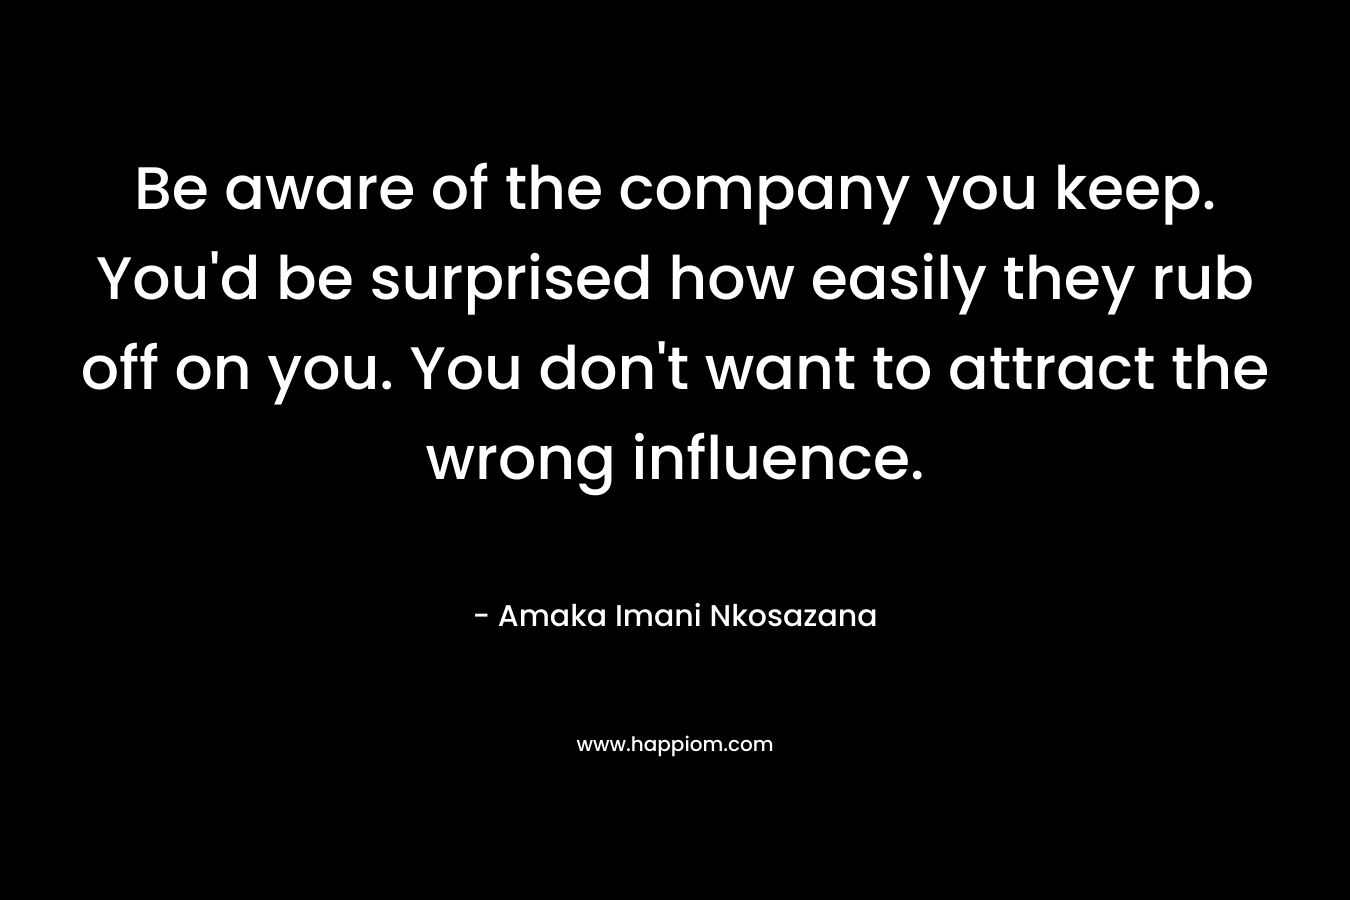 Be aware of the company you keep. You’d be surprised how easily they rub off on you. You don’t want to attract the wrong influence. – Amaka Imani Nkosazana